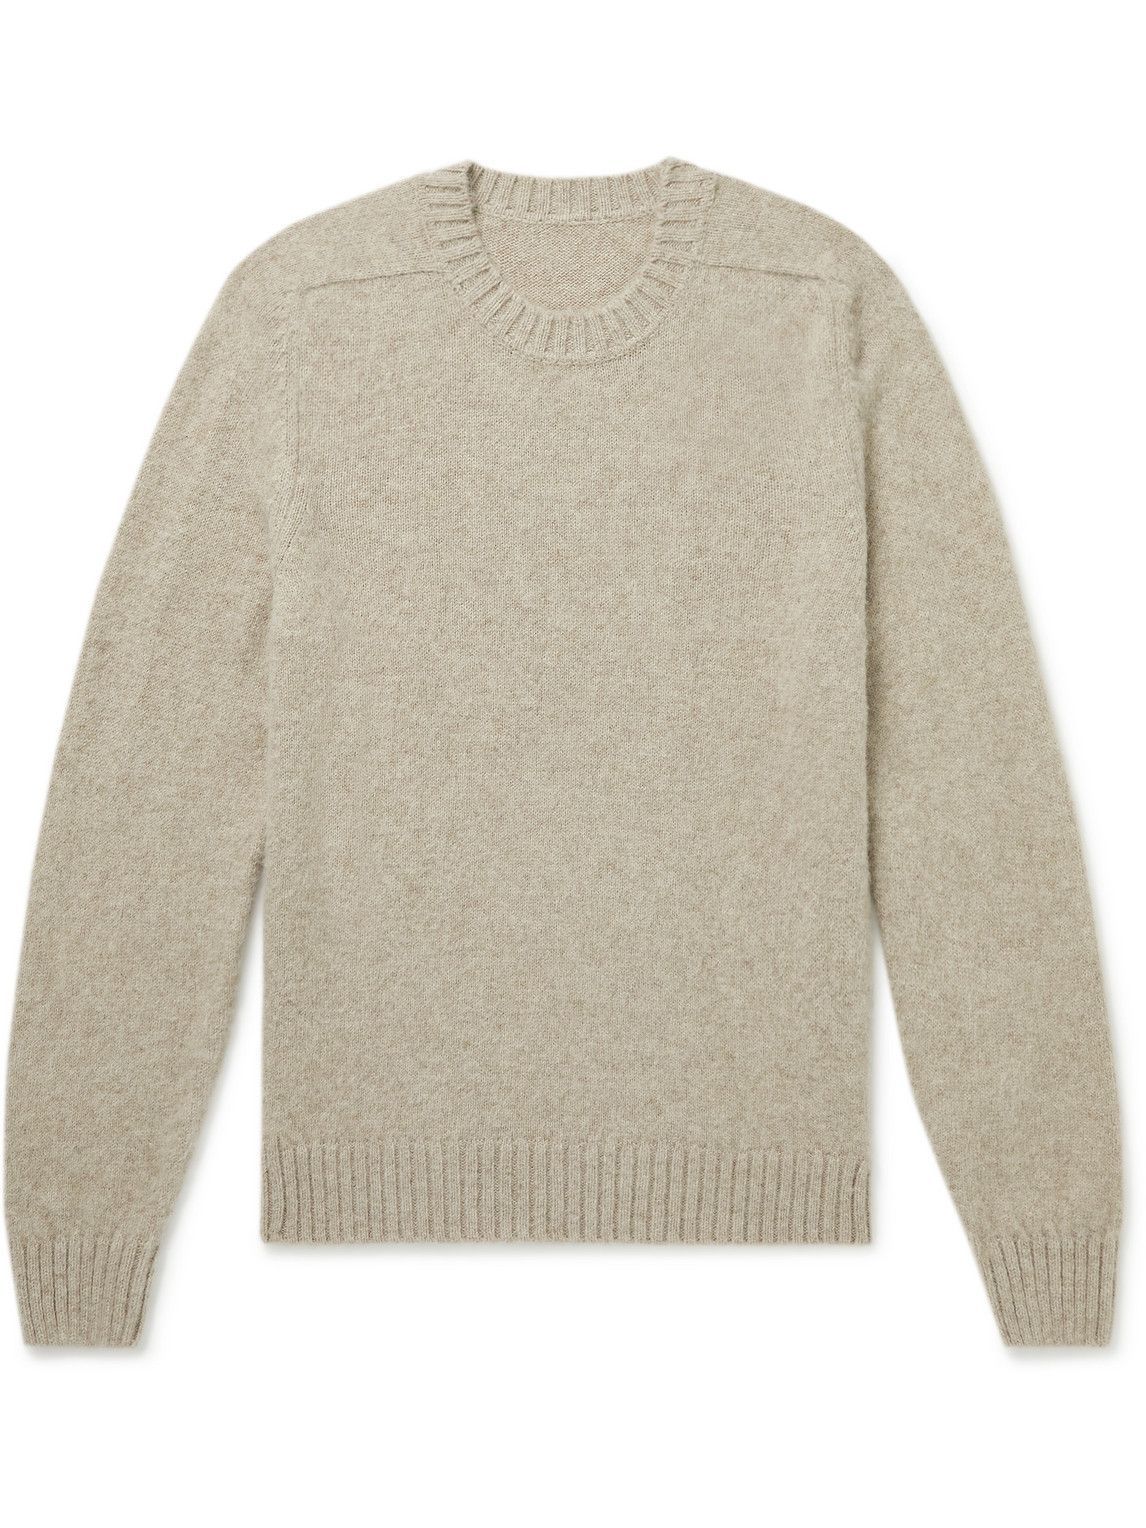 Anderson & Sheppard - Brushed-Wool Sweater - Neutrals Anderson & Sheppard